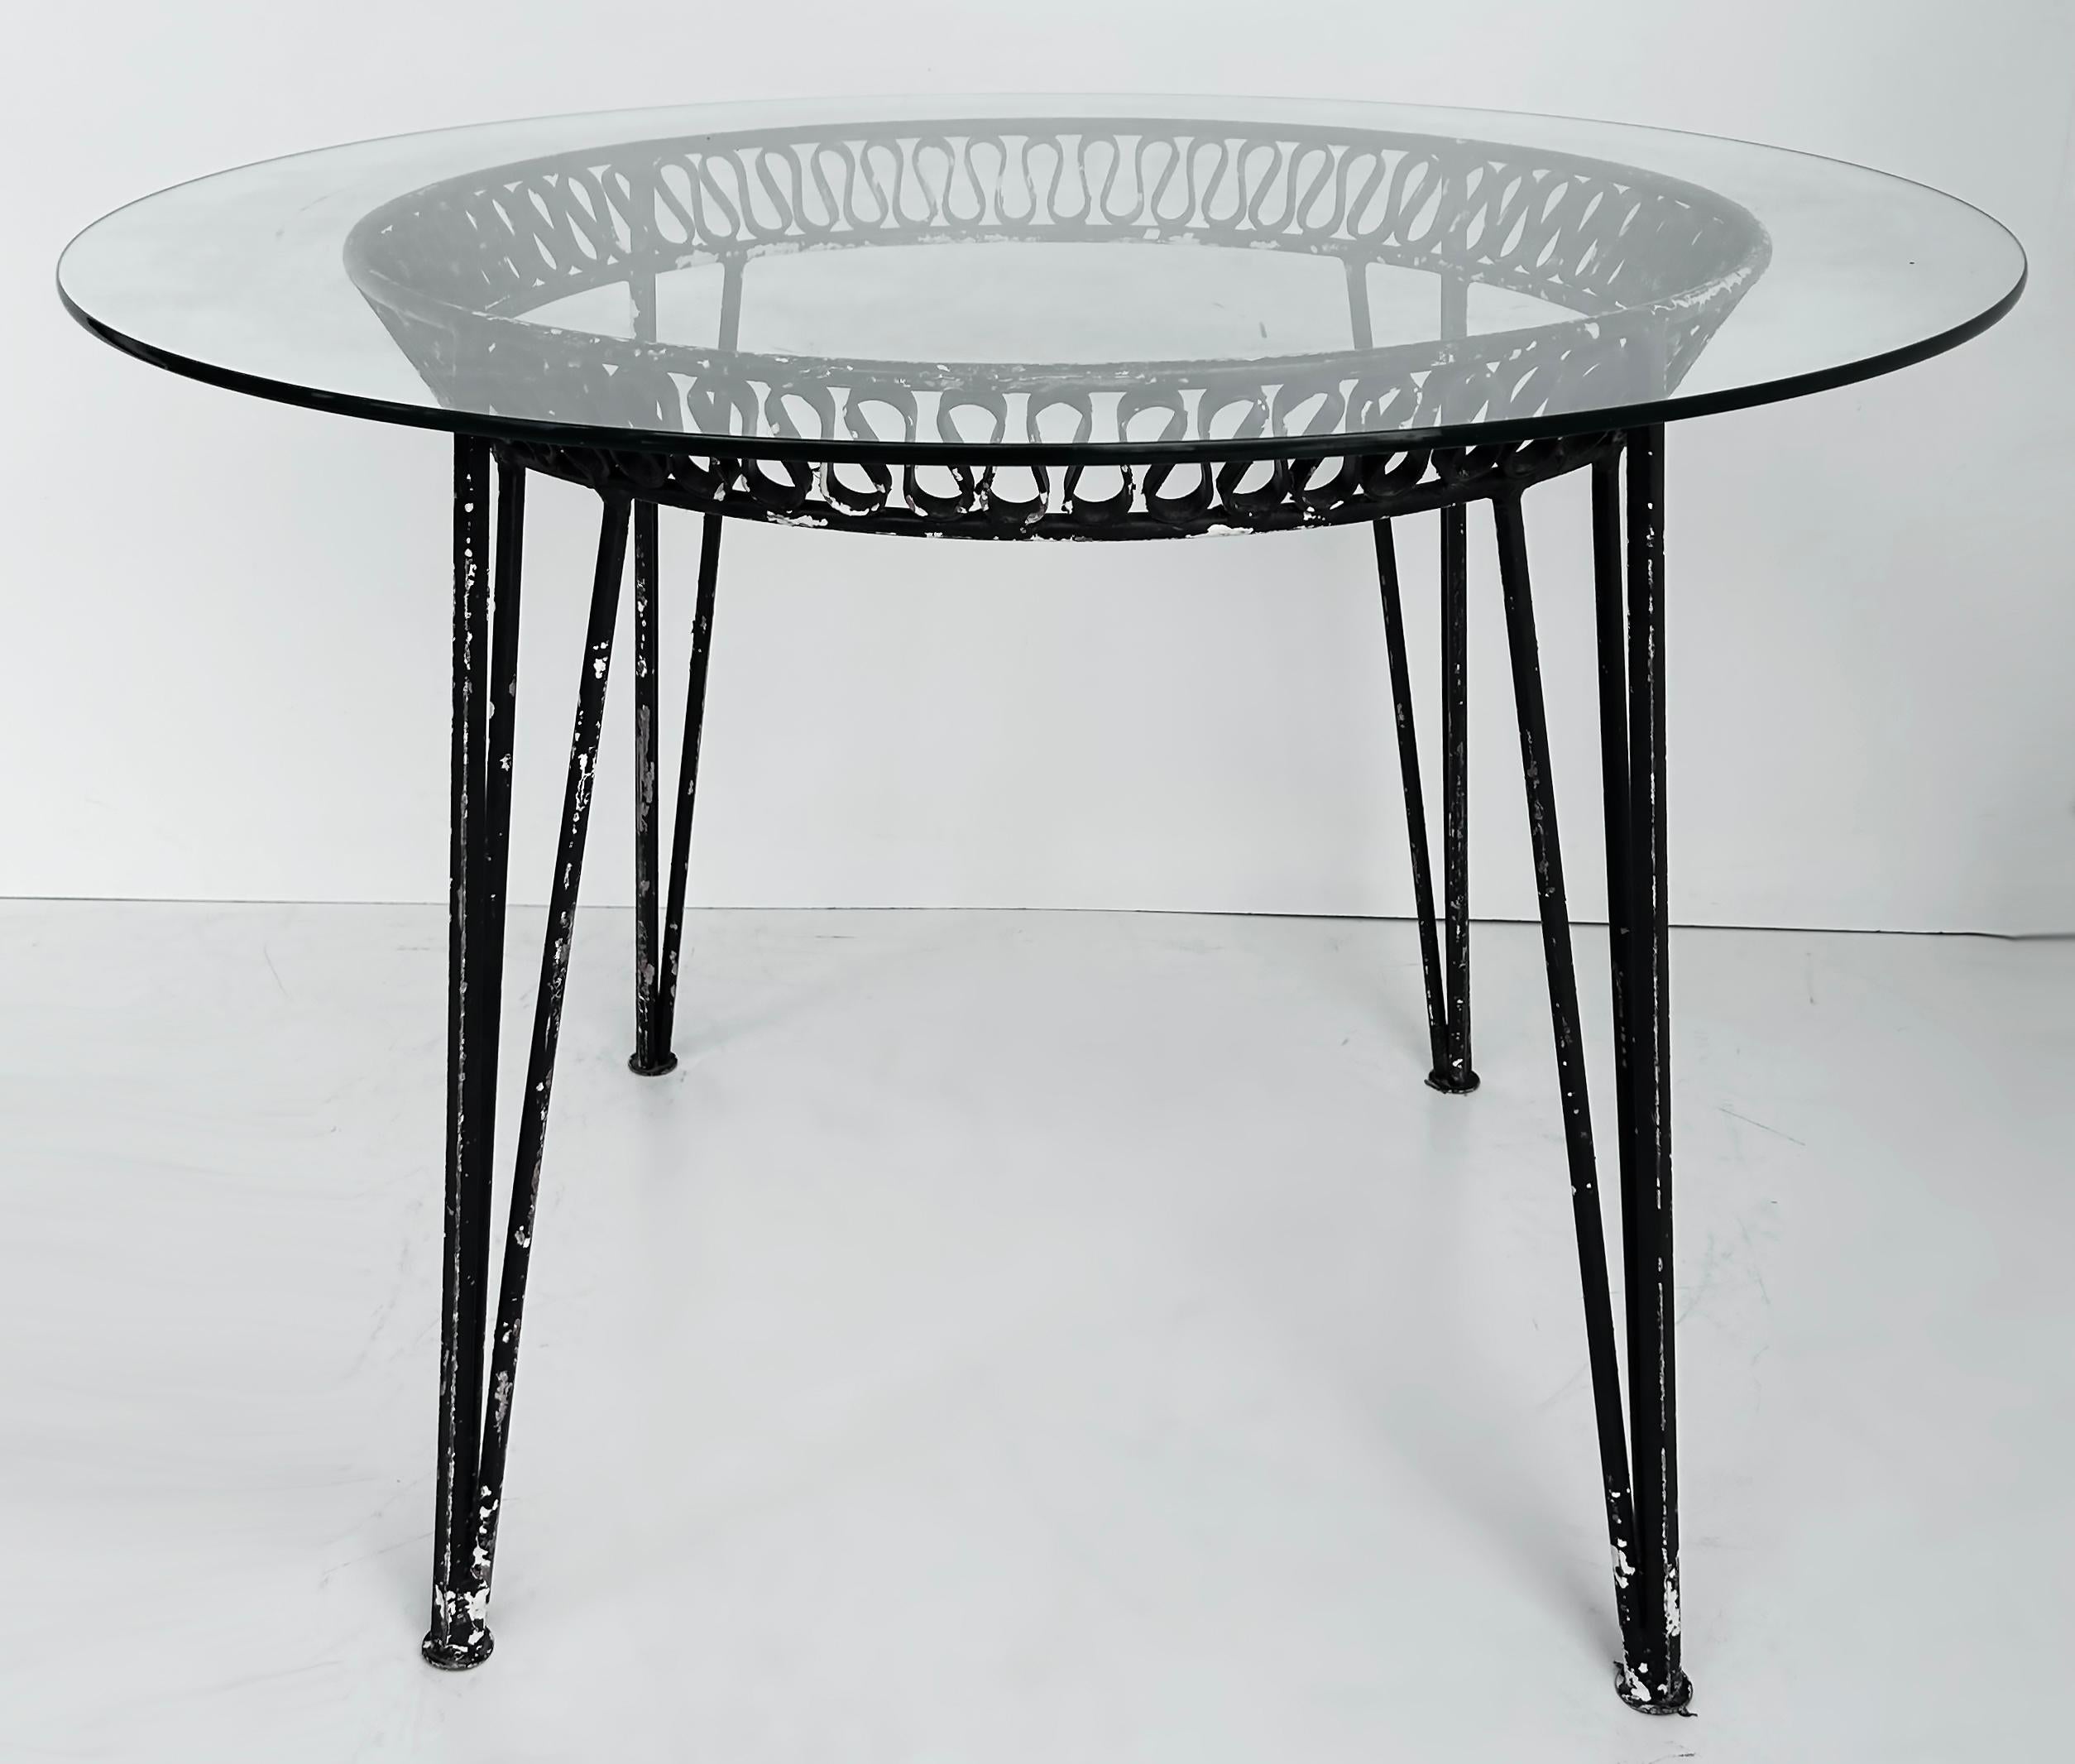 Vintage Salterini Ribbon Style Mid-20th Century Modern Round Table and Glass Top For Sale 1